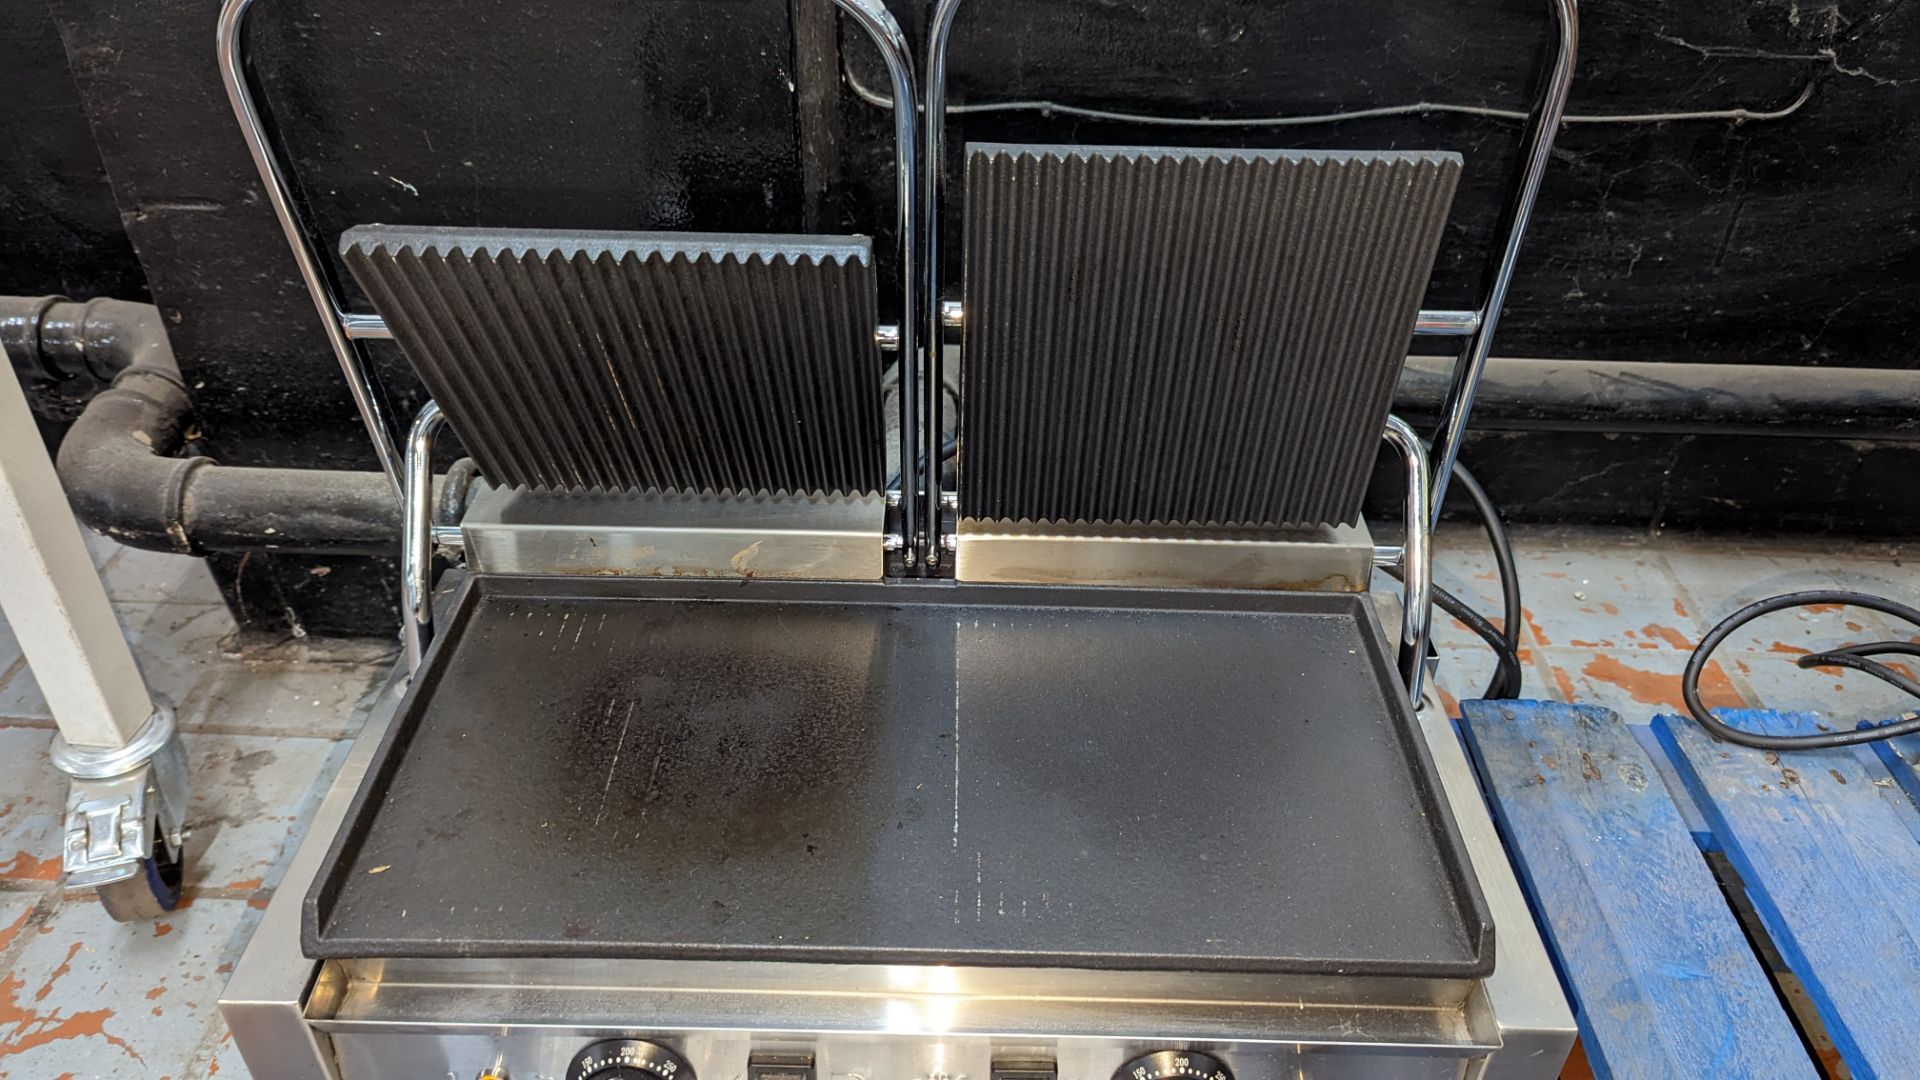 Dualit RCG2 double panini contact grill, including manual - Image 5 of 8